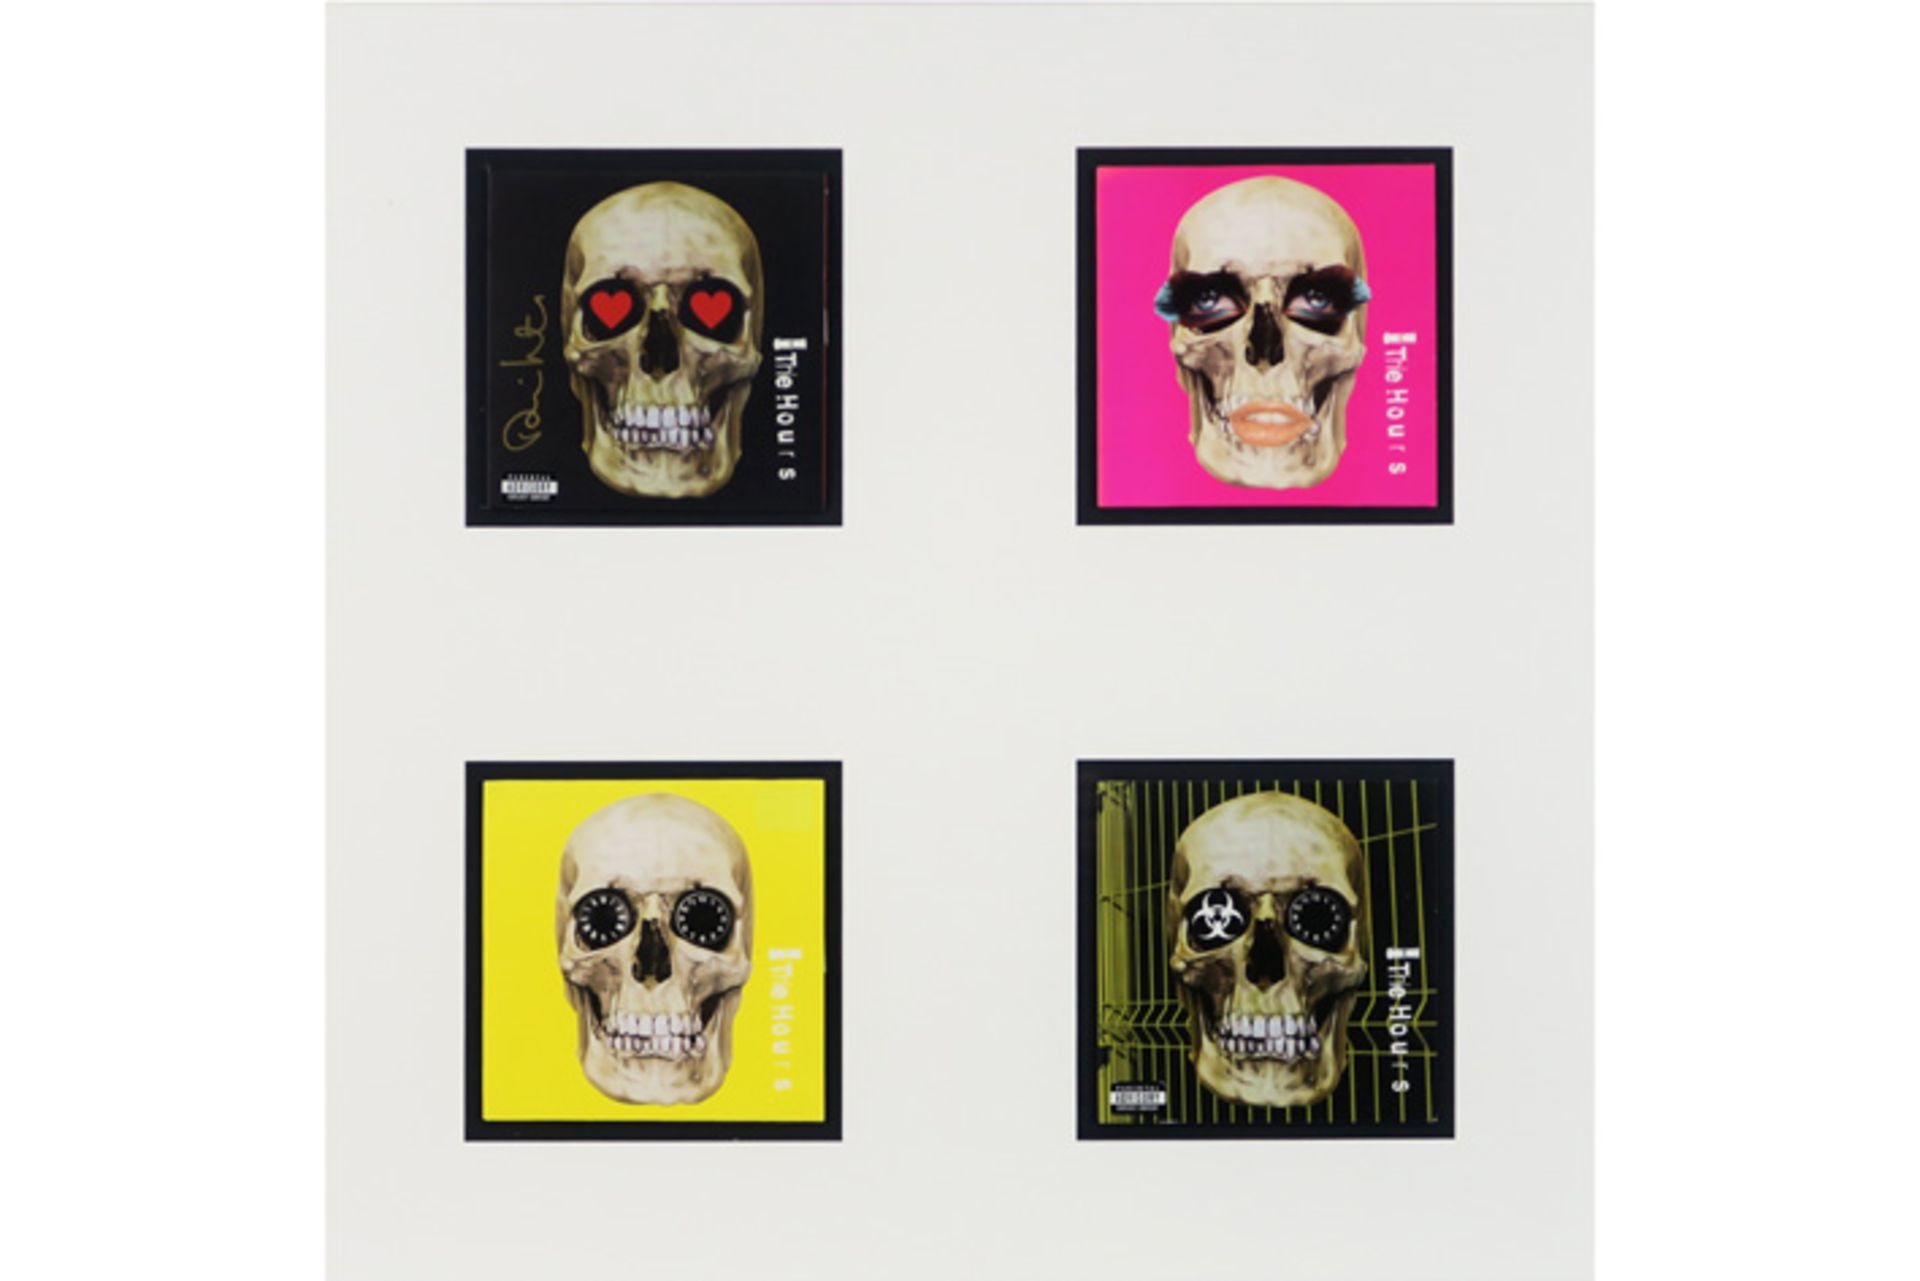 four recordcover for singles by "The Hours" designed by Damien Hirst - in one frame one is signed